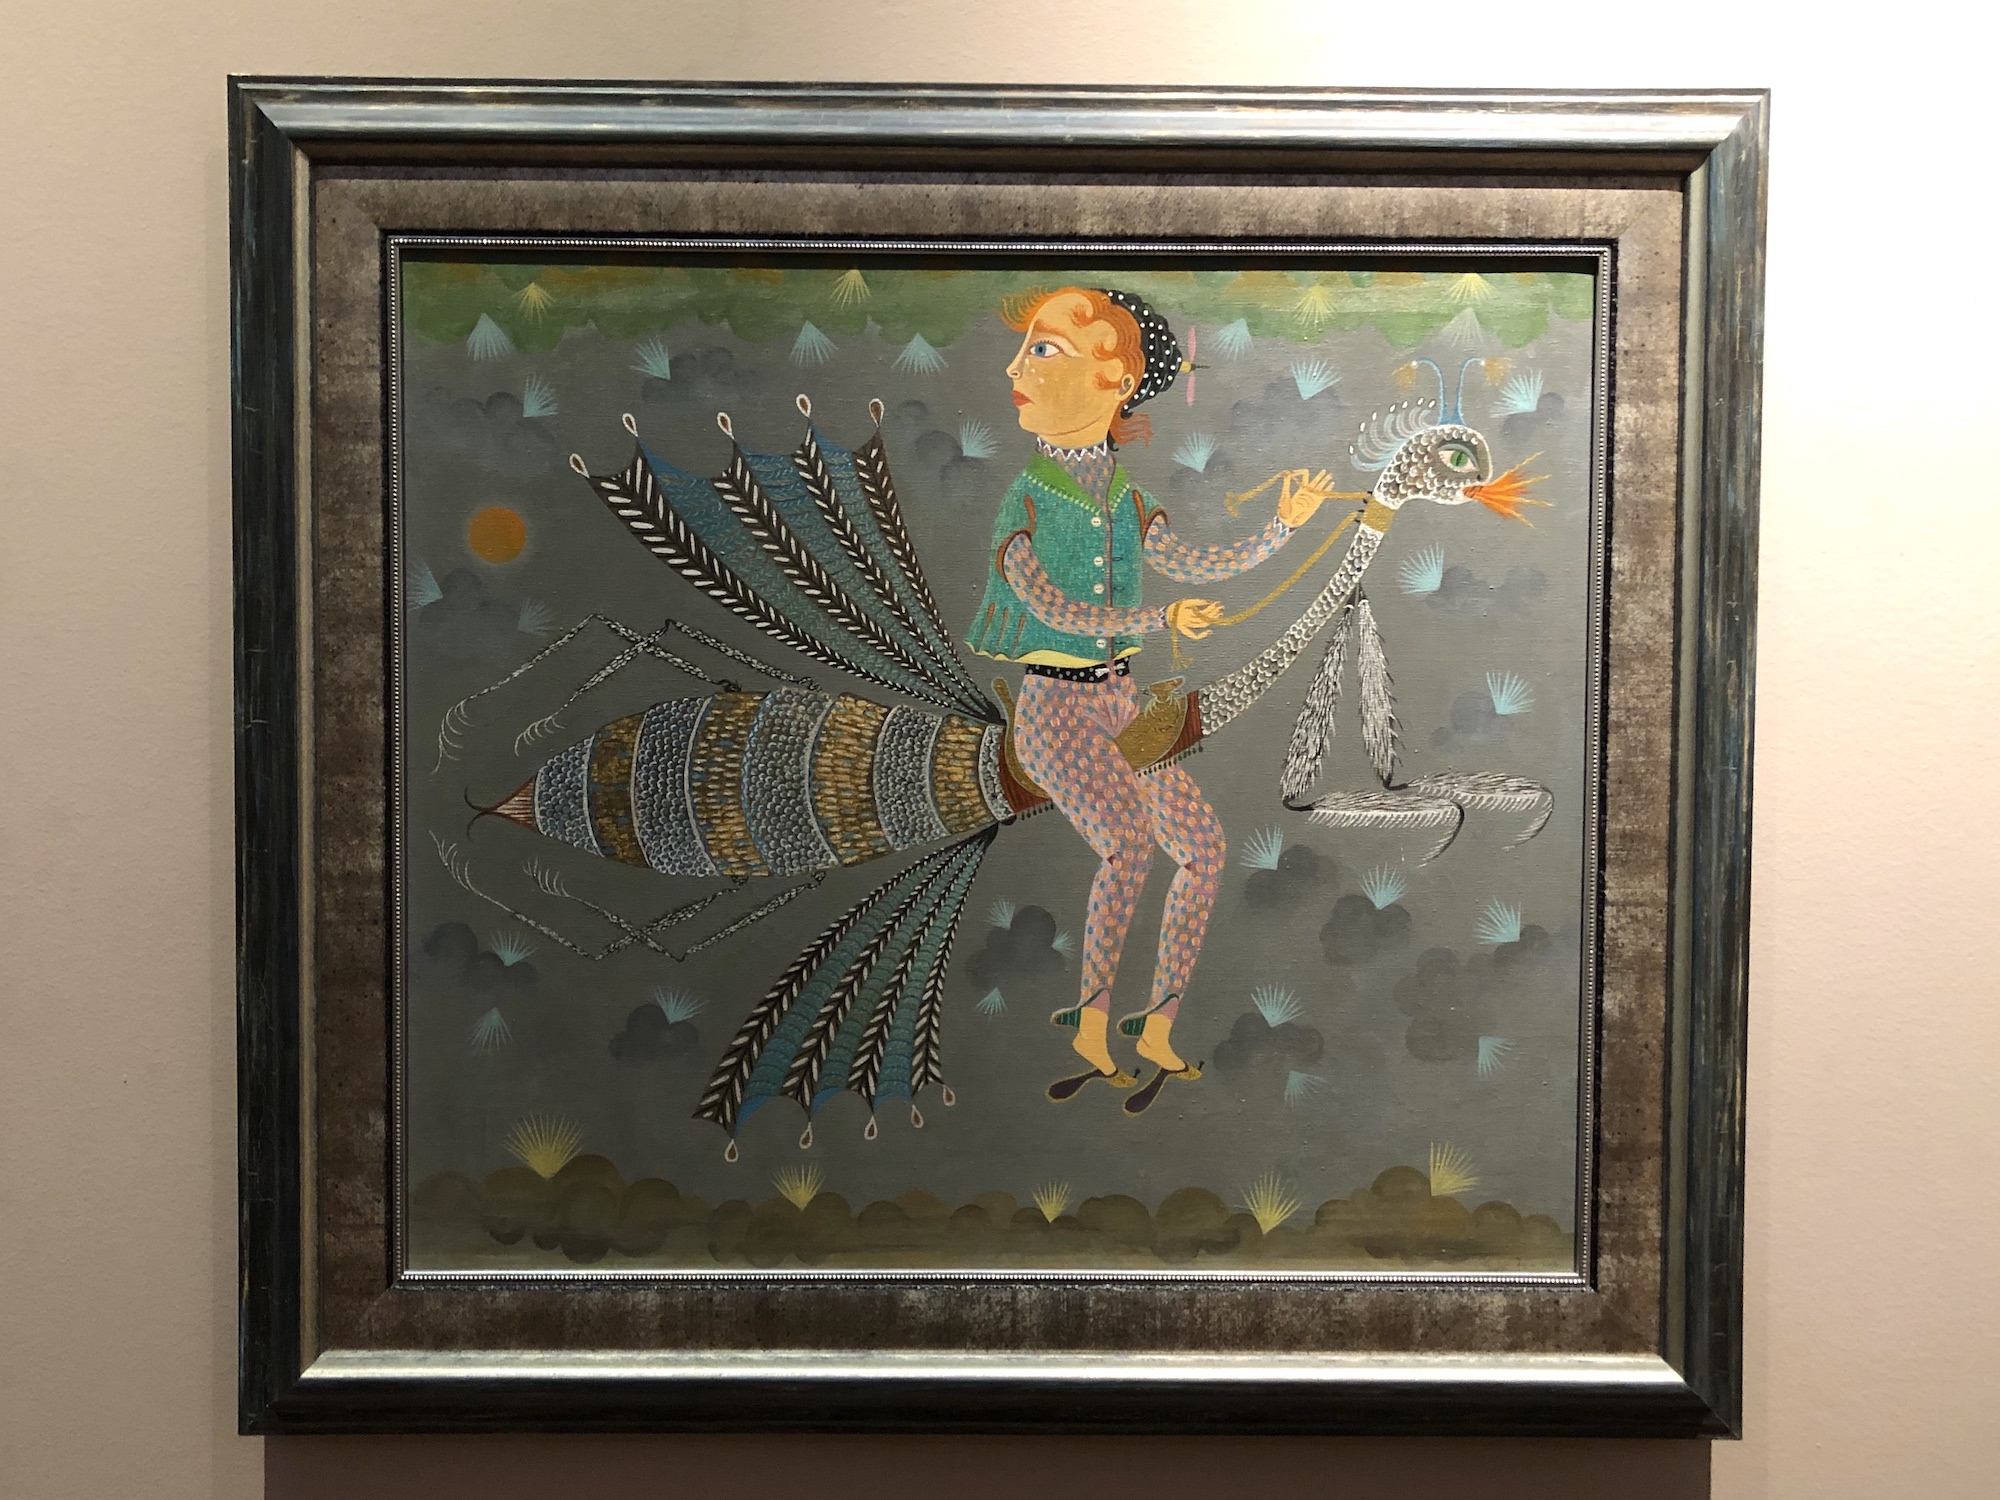 Lady Being Carried off by a Praying Mantis by Sylvia Fein at the Chazen Museum of Art in Madison Wisconsin.